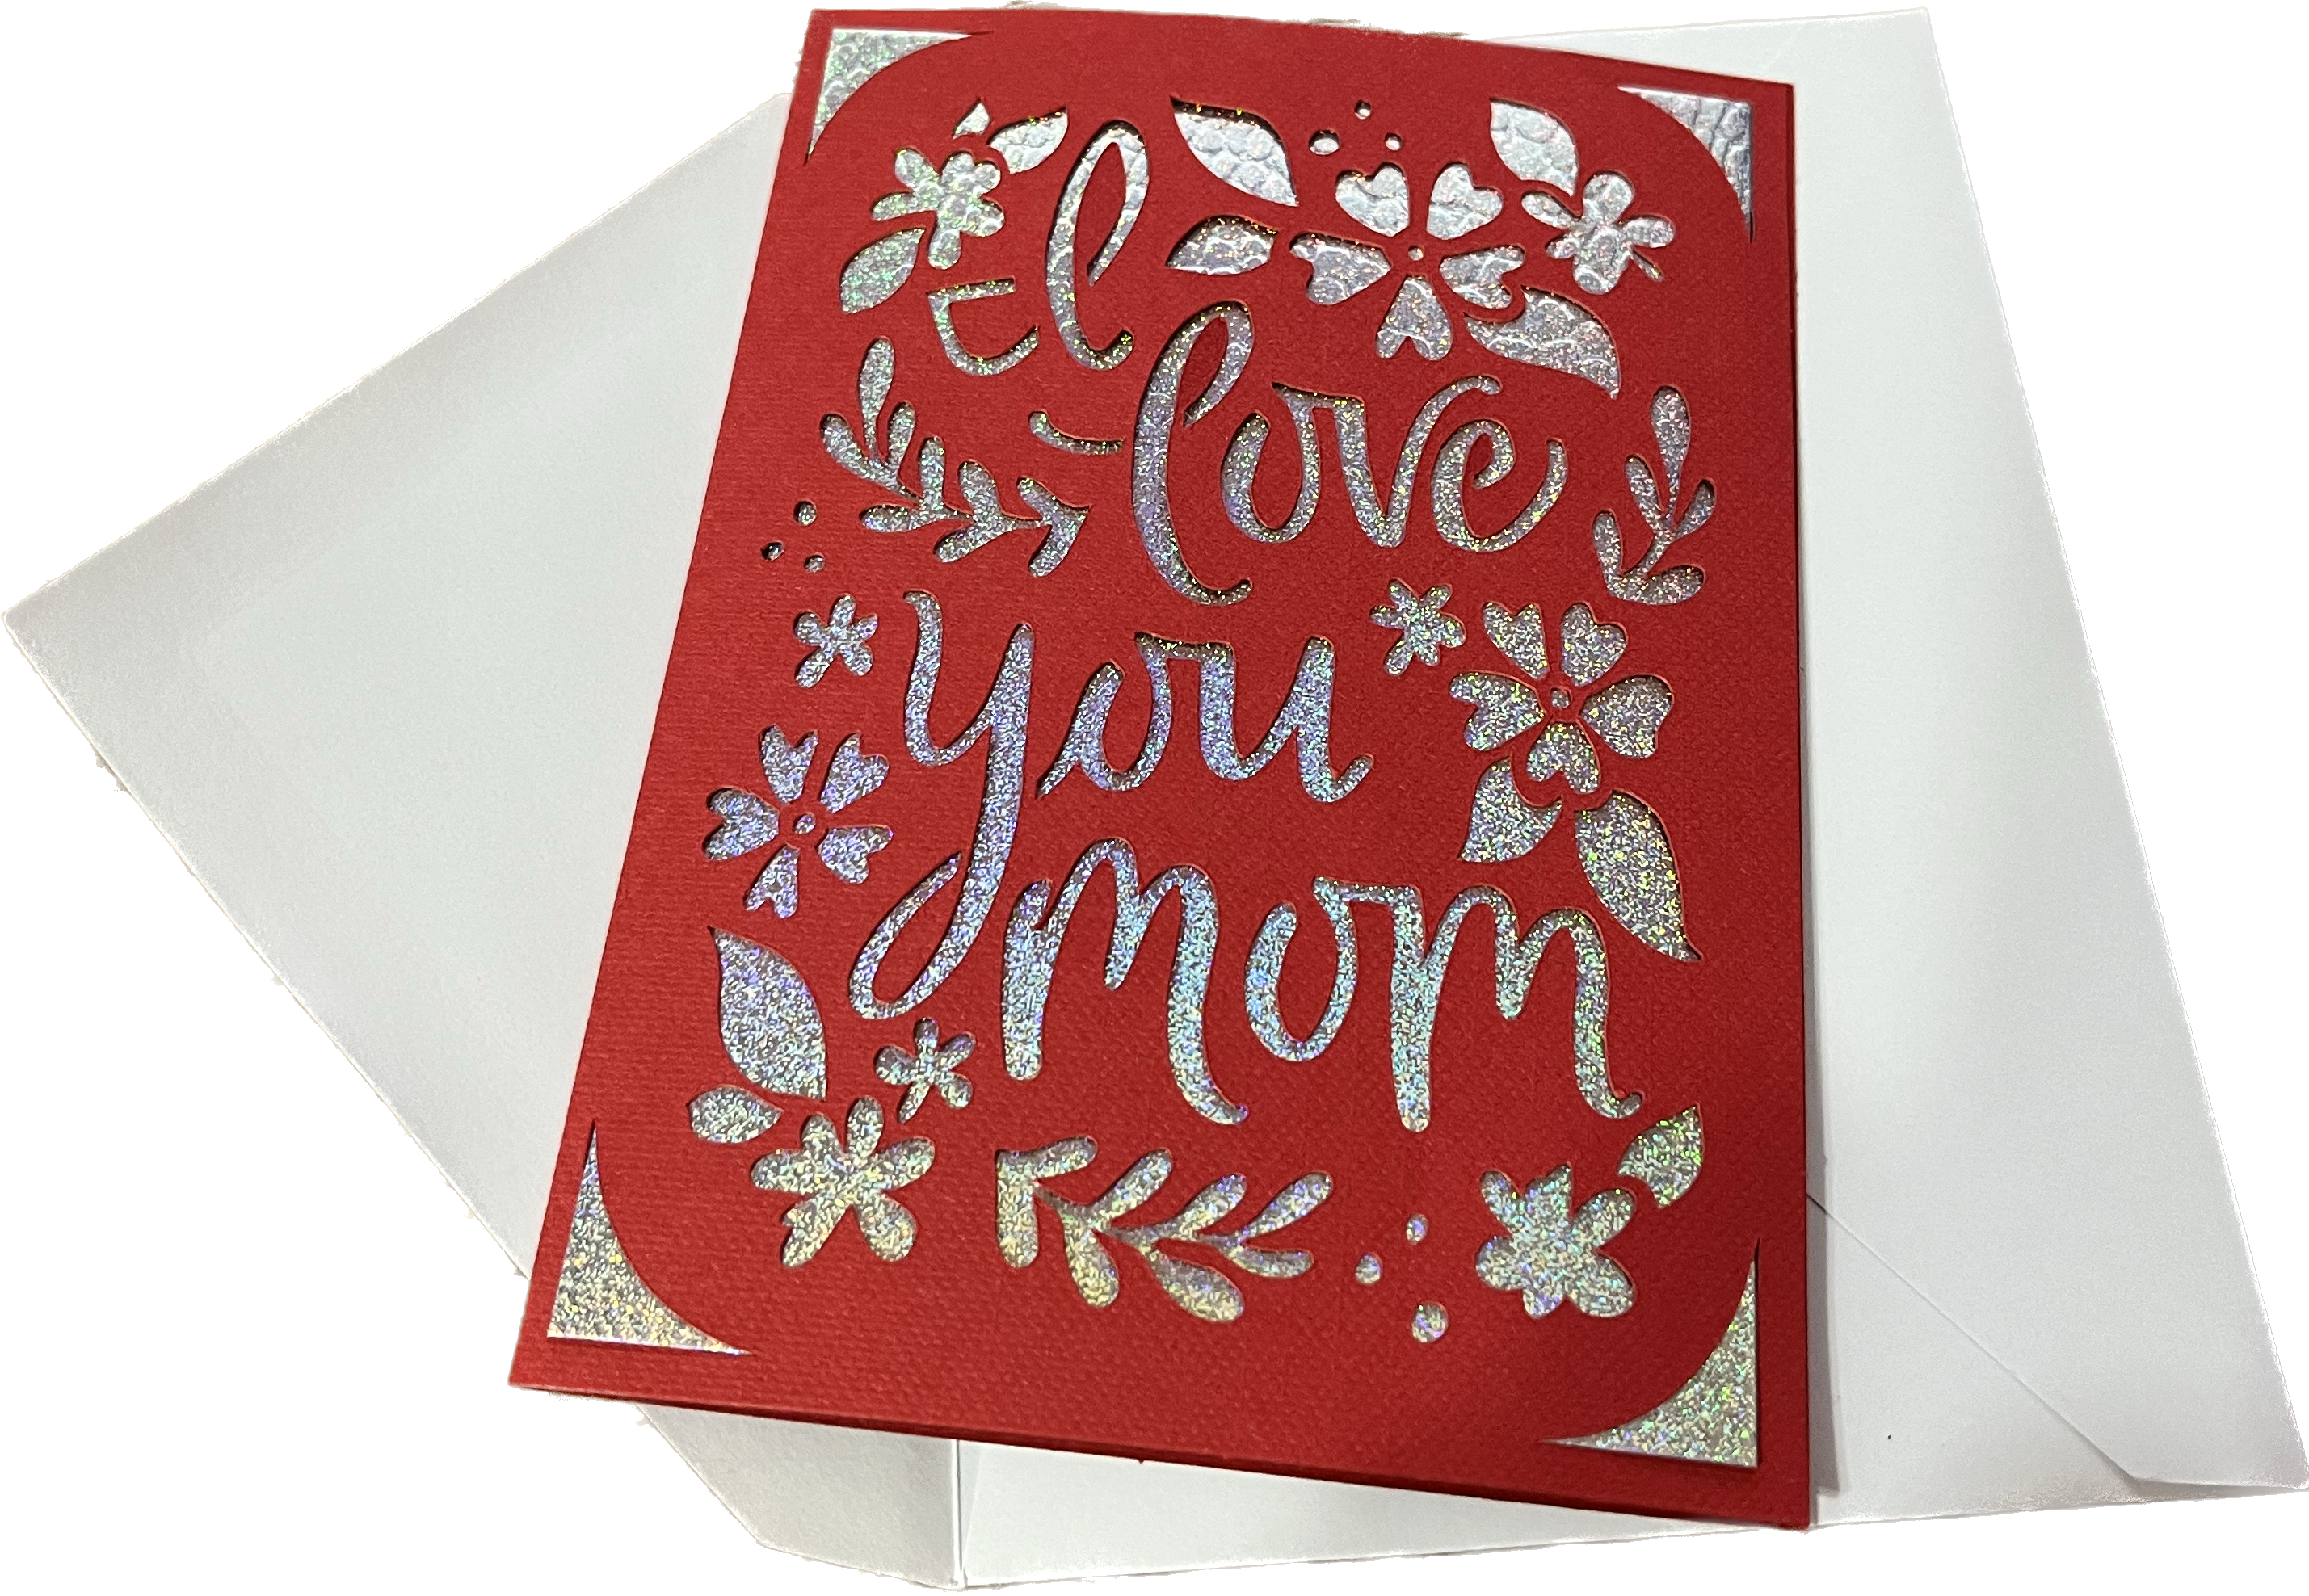 I Love You Mom Card - Made by Luke (My young son)